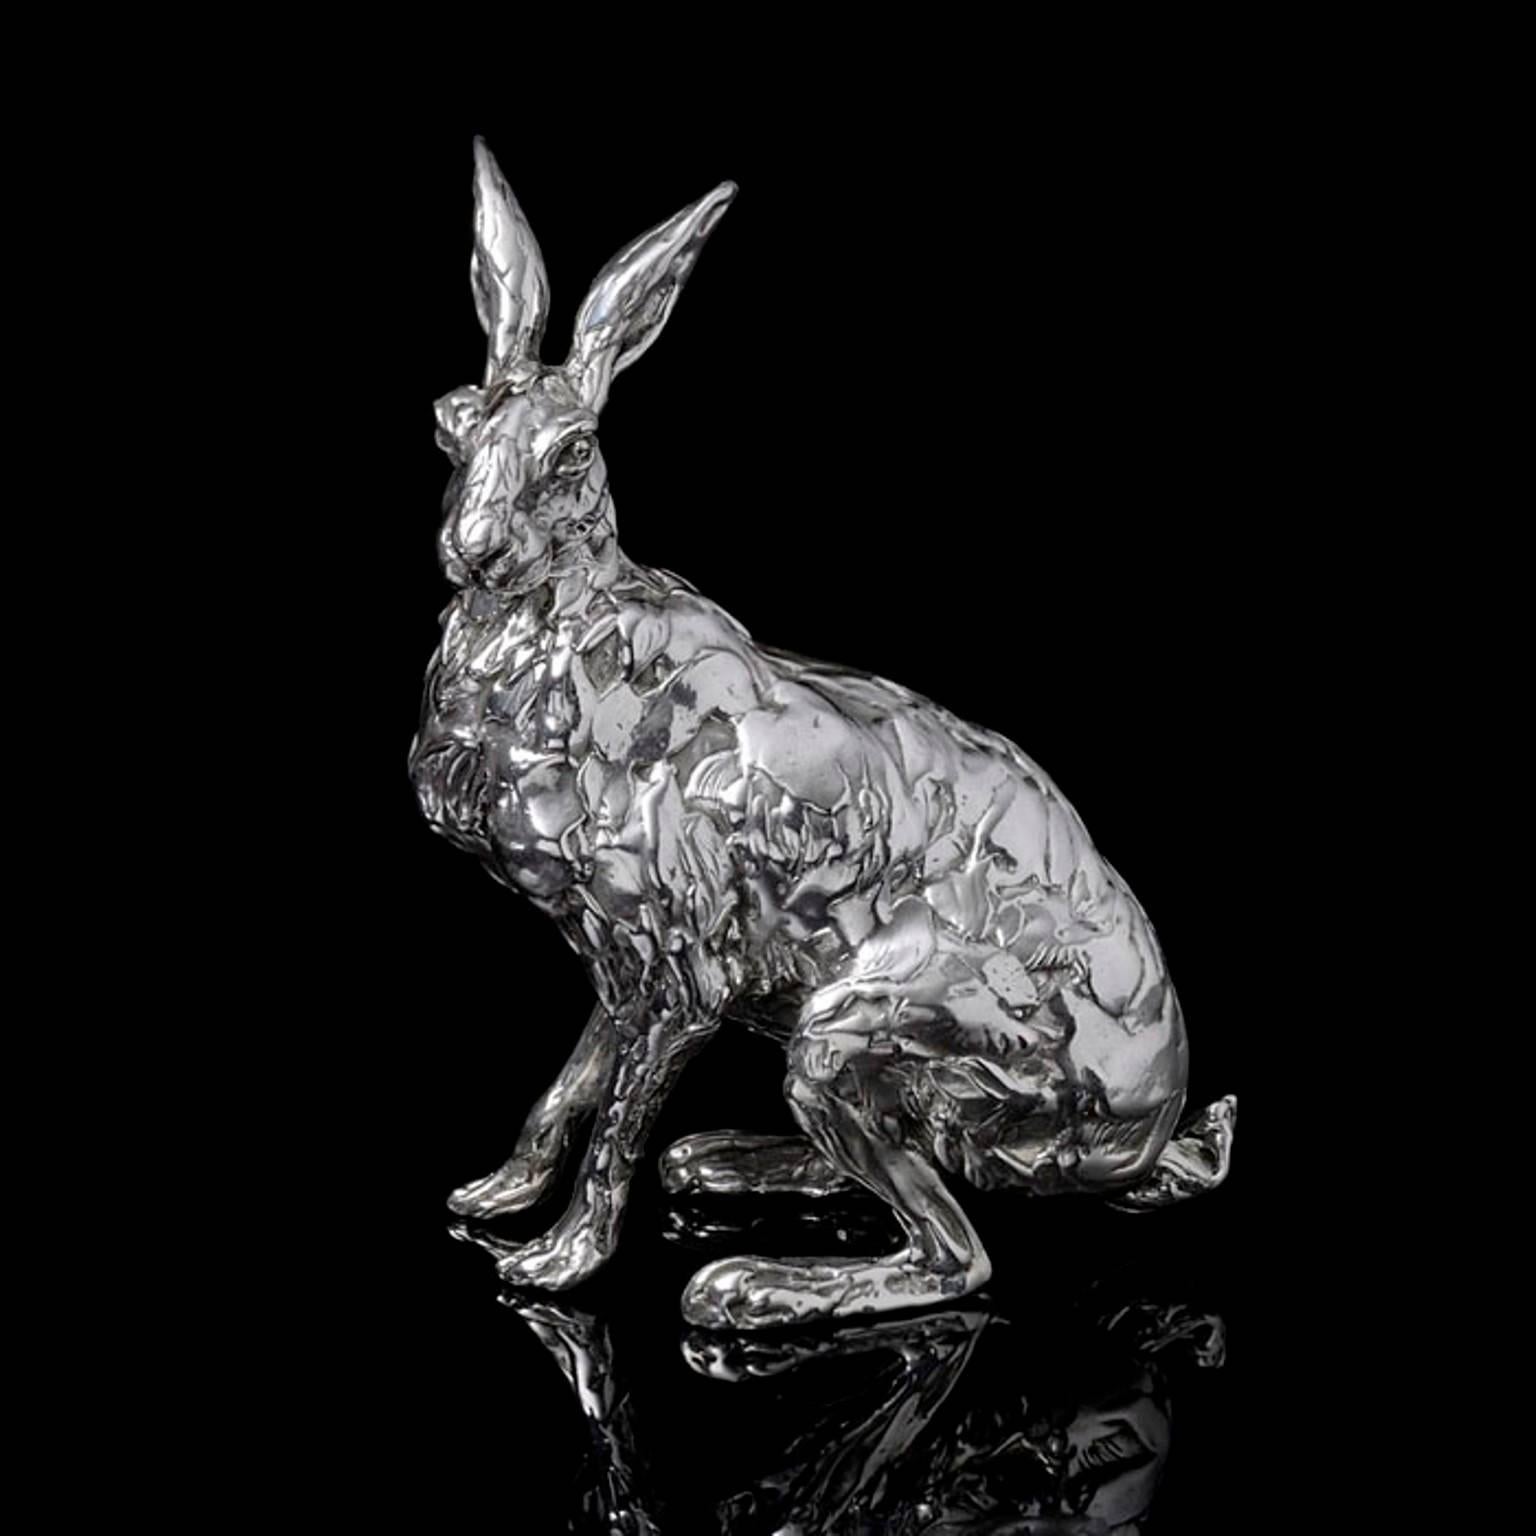 A 'Seated Hare' sterling silver sculpture by Lucy Kinsella, the limited edition finely modelled hare sits upright and alert, his front legs straight, muscles tensed, poised to run at any moment.  His long ears are held aloft and his eyes are